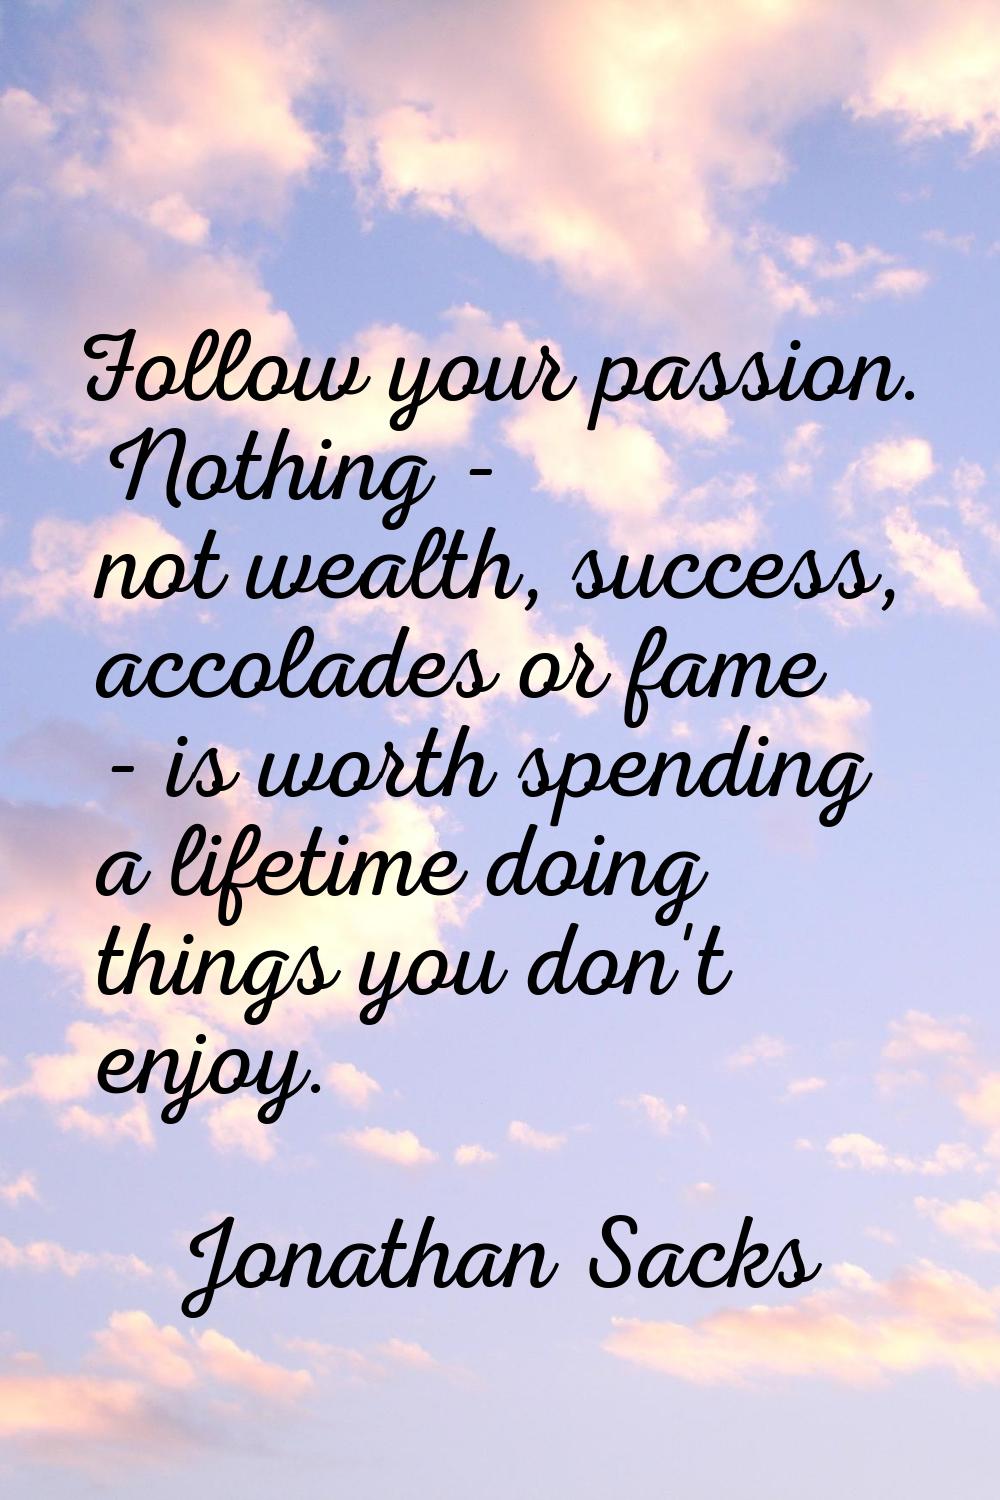 Follow your passion. Nothing - not wealth, success, accolades or fame - is worth spending a lifetim